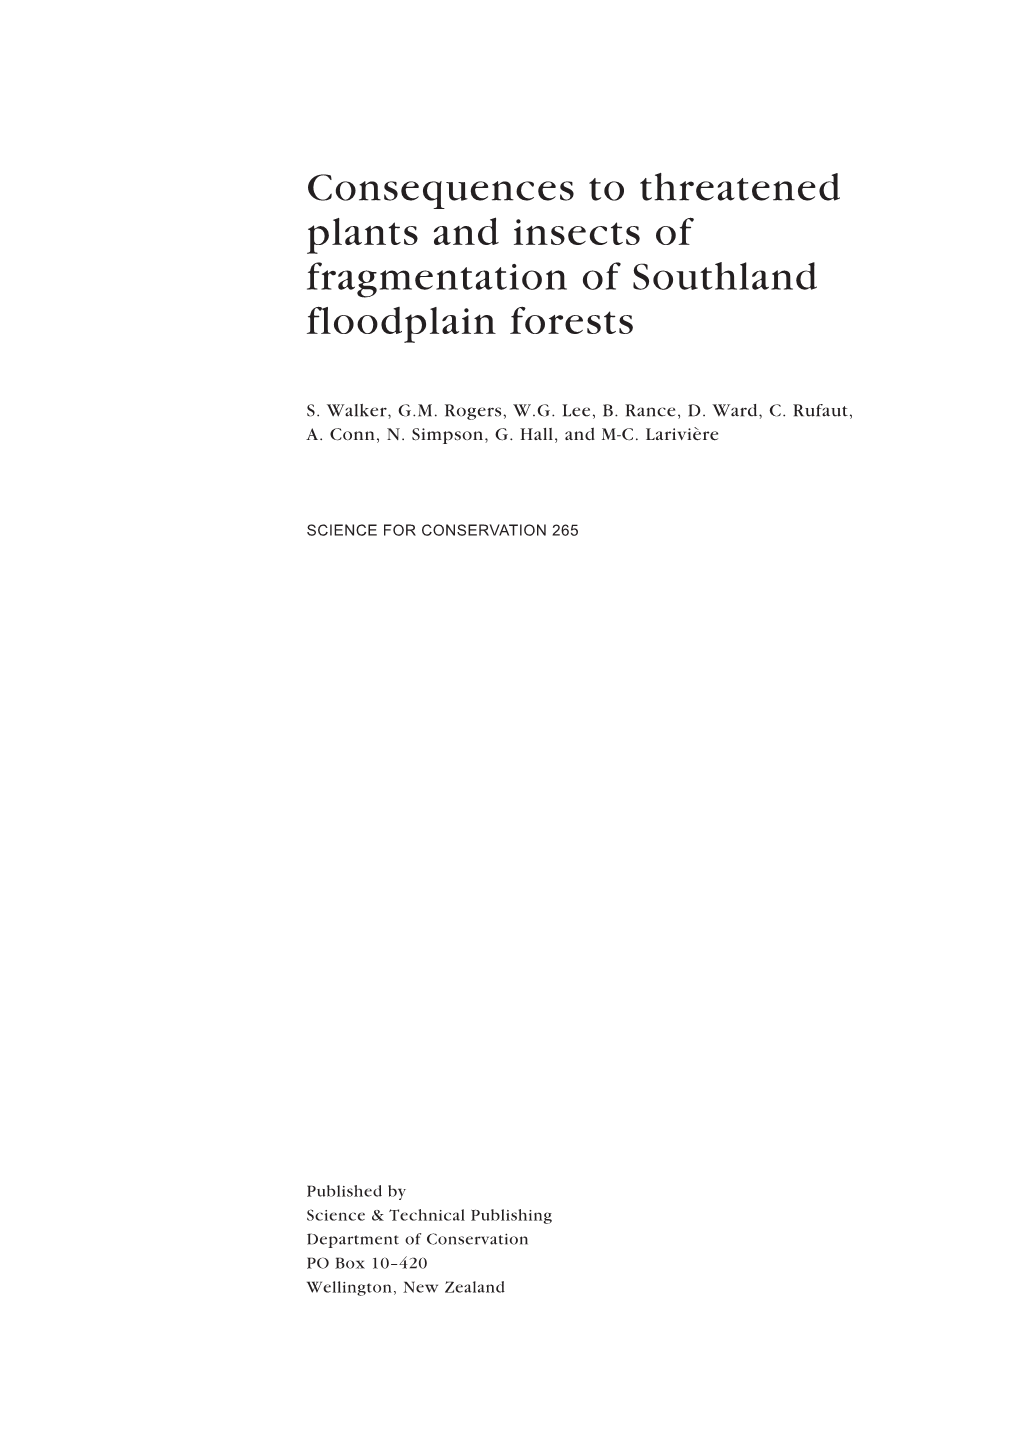 Consequences to Threatened Plants and Insects of Fragmentation of Southland Floodplain Forests